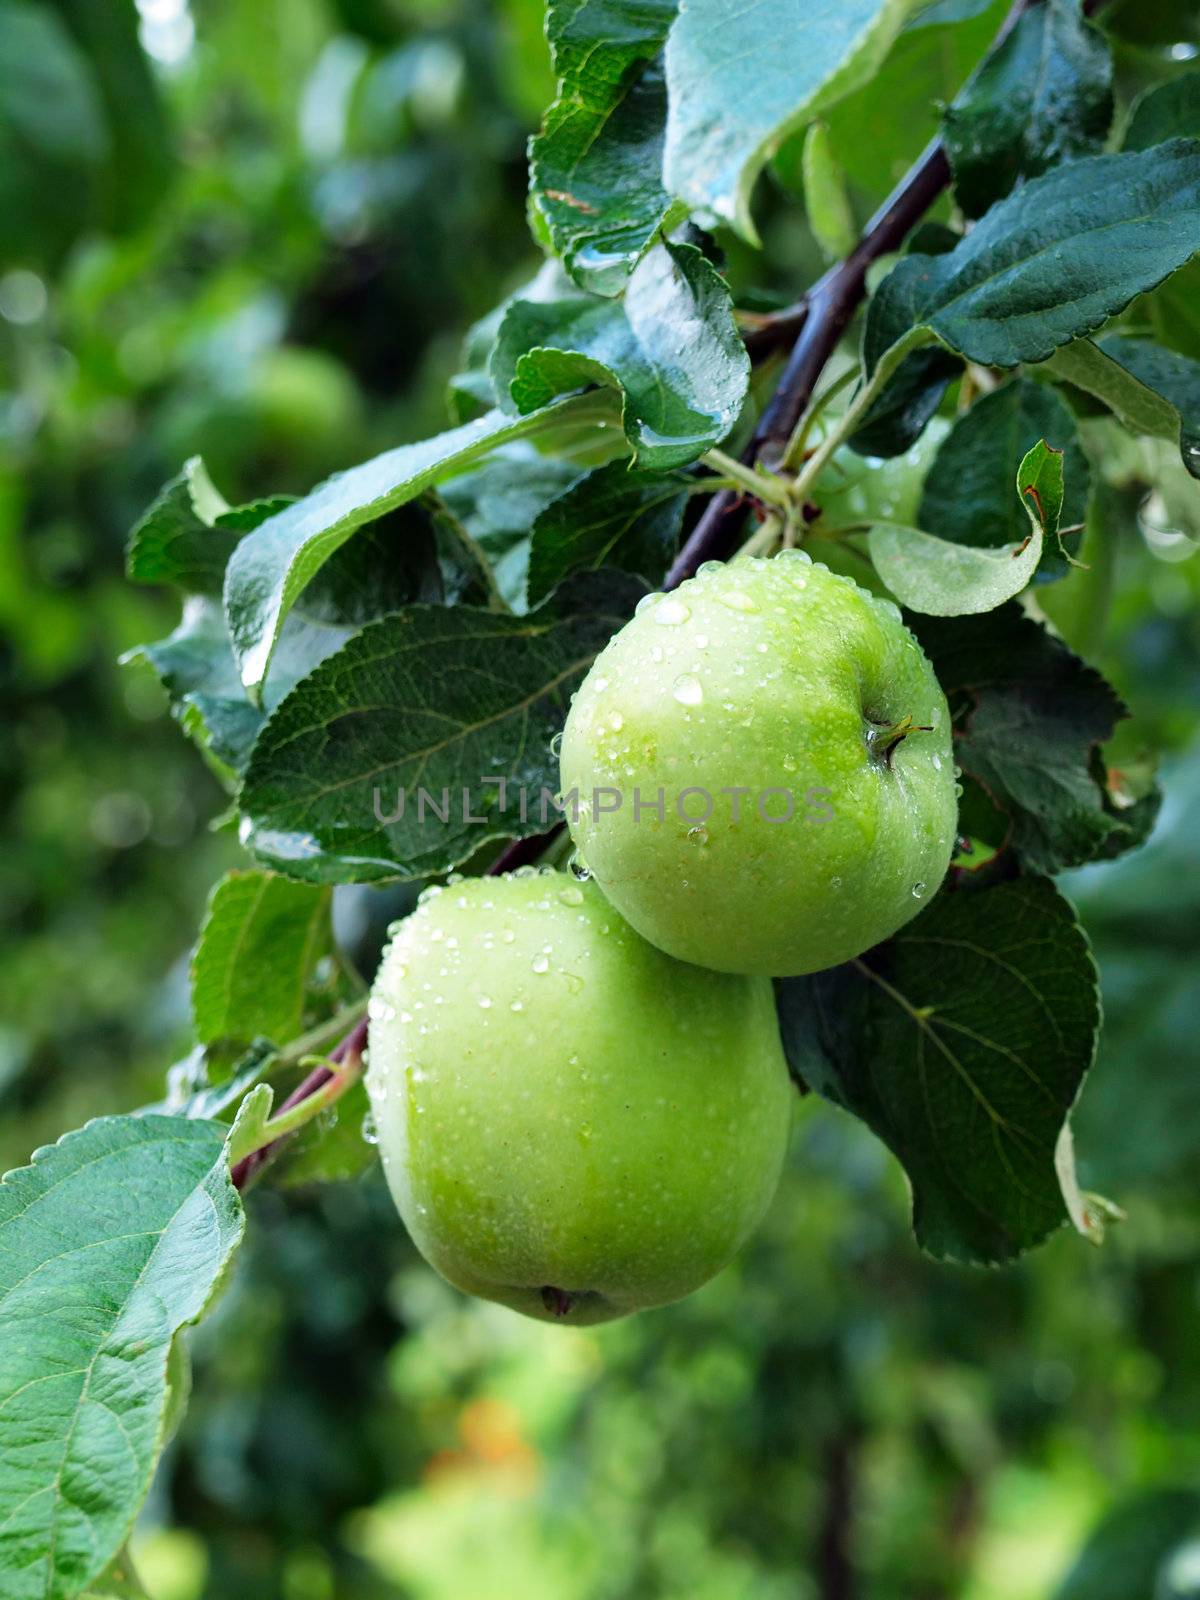 Green apples hanging on branch with water droplets. Shallow depth of field.